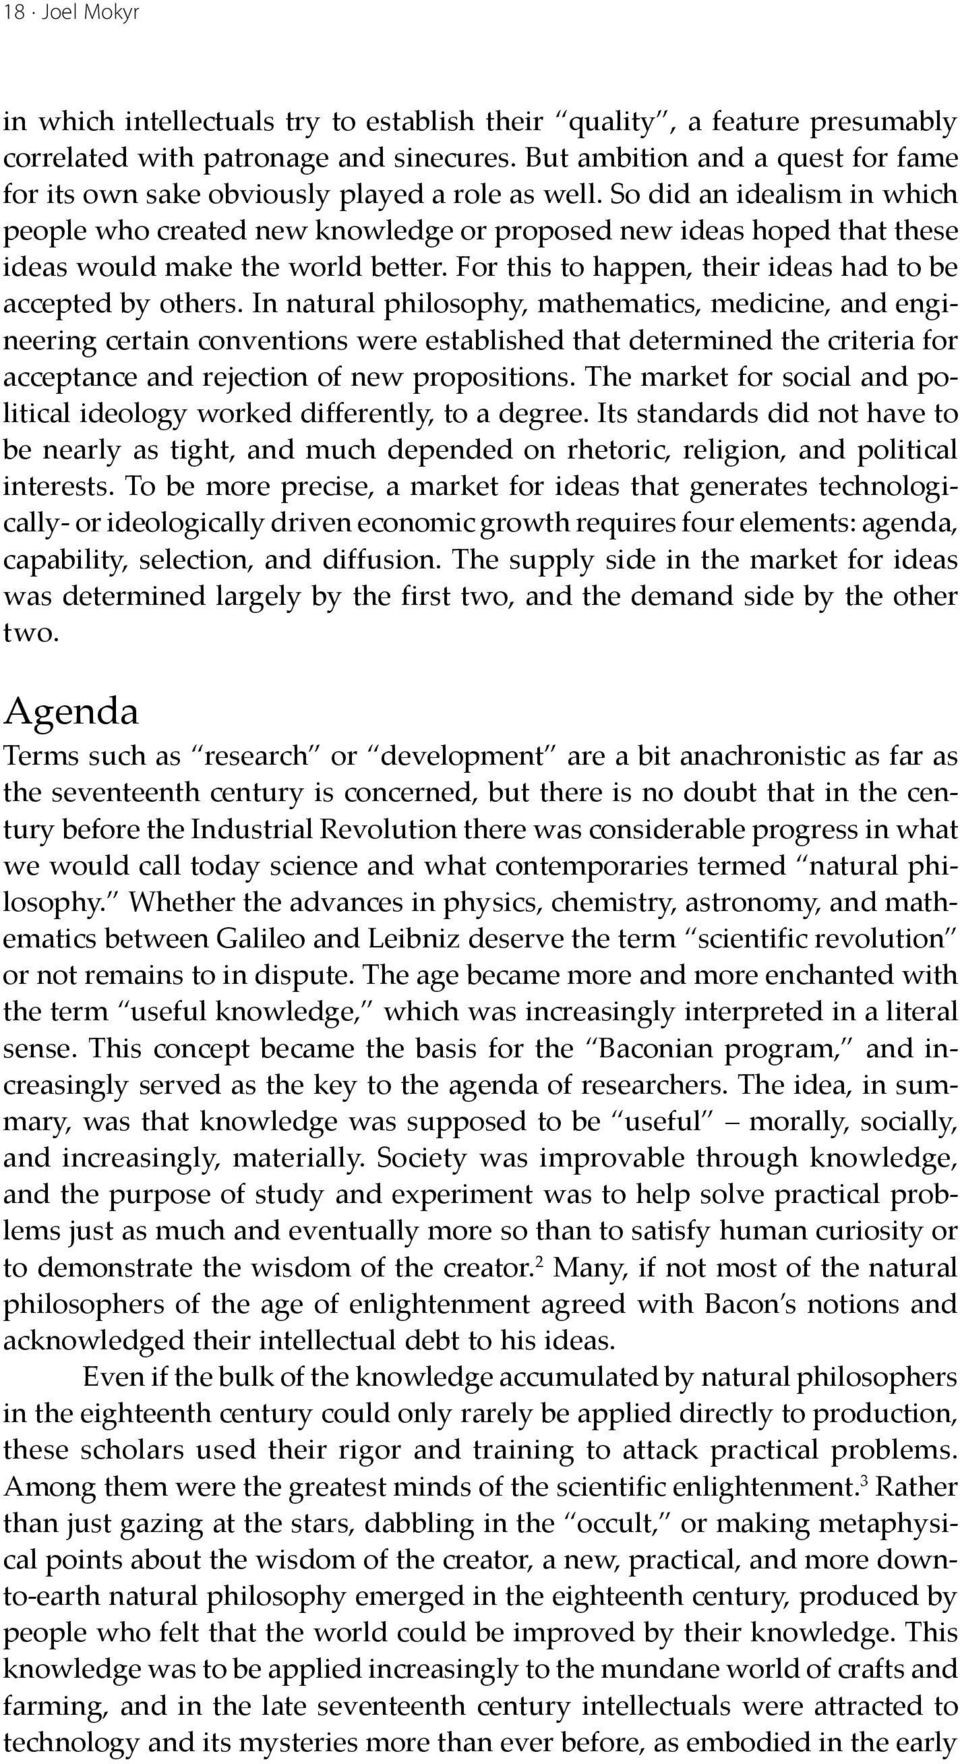 So did an idealism in which people who created new knowledge or proposed new ideas hoped that these ideas would make the world better. For this to happen, their ideas had to be accepted by others.